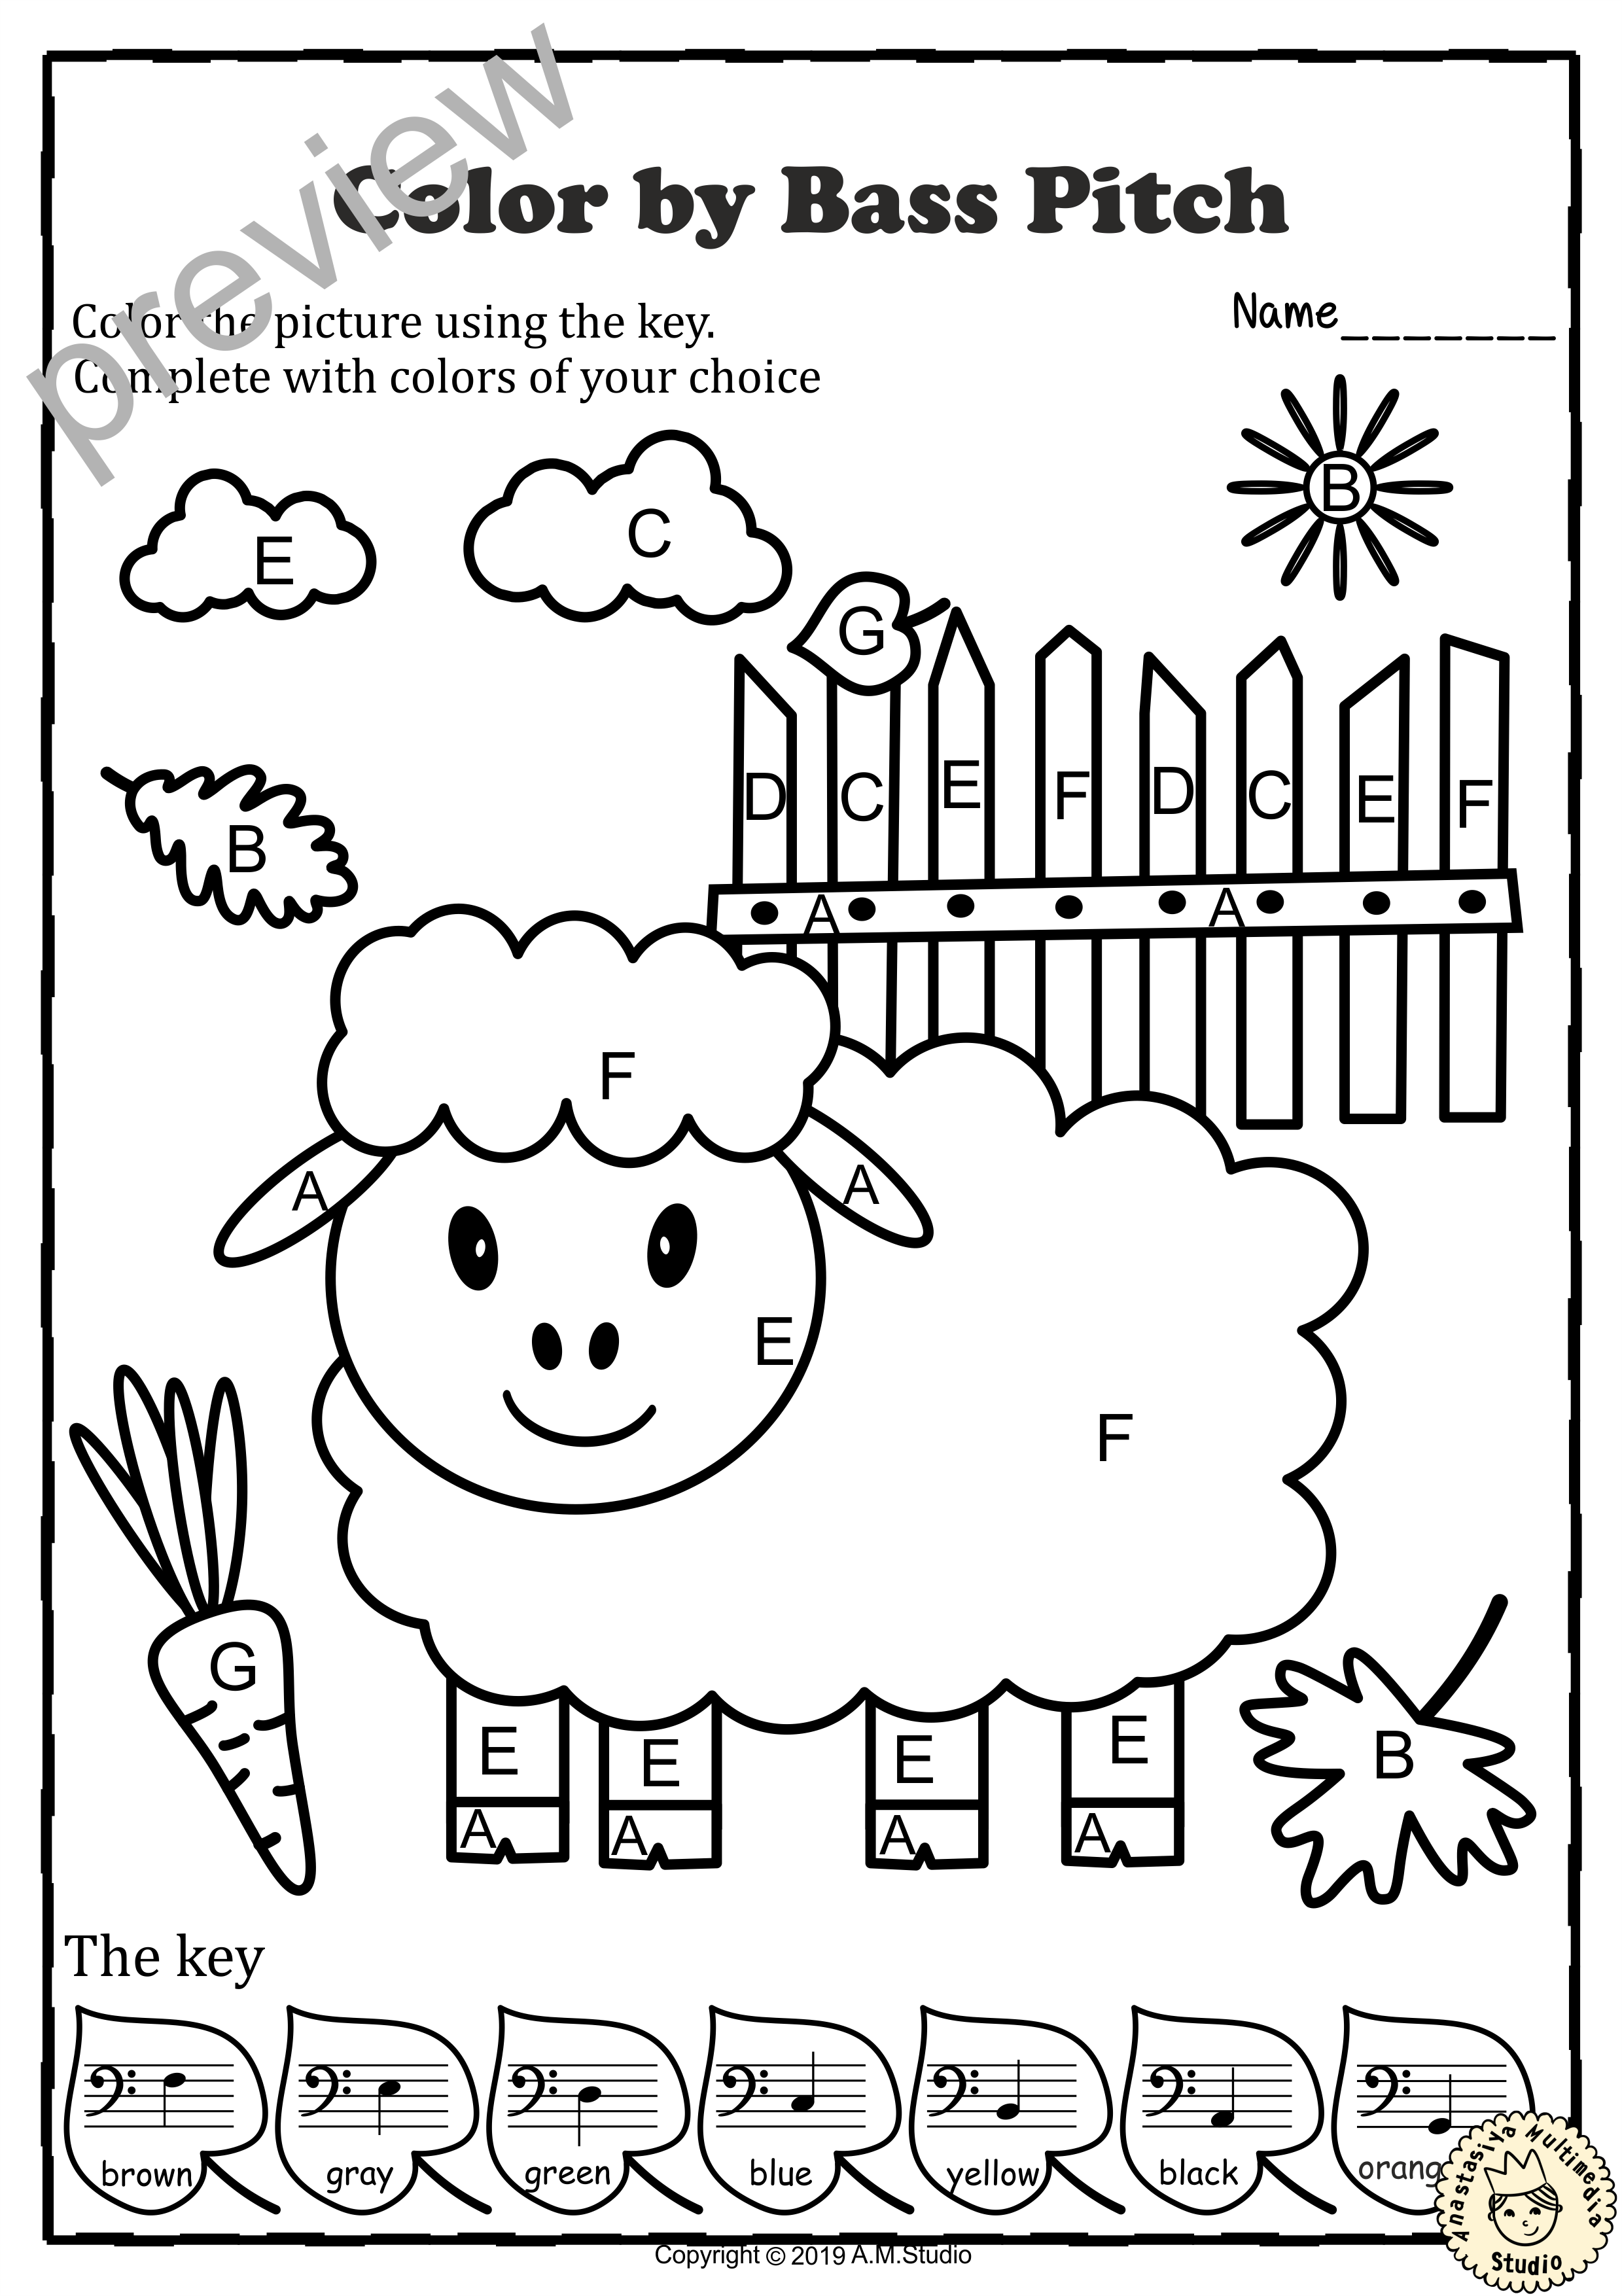 Musical Coloring Pages for Fall {Color by Bass Pitch} with answers (img # 3)